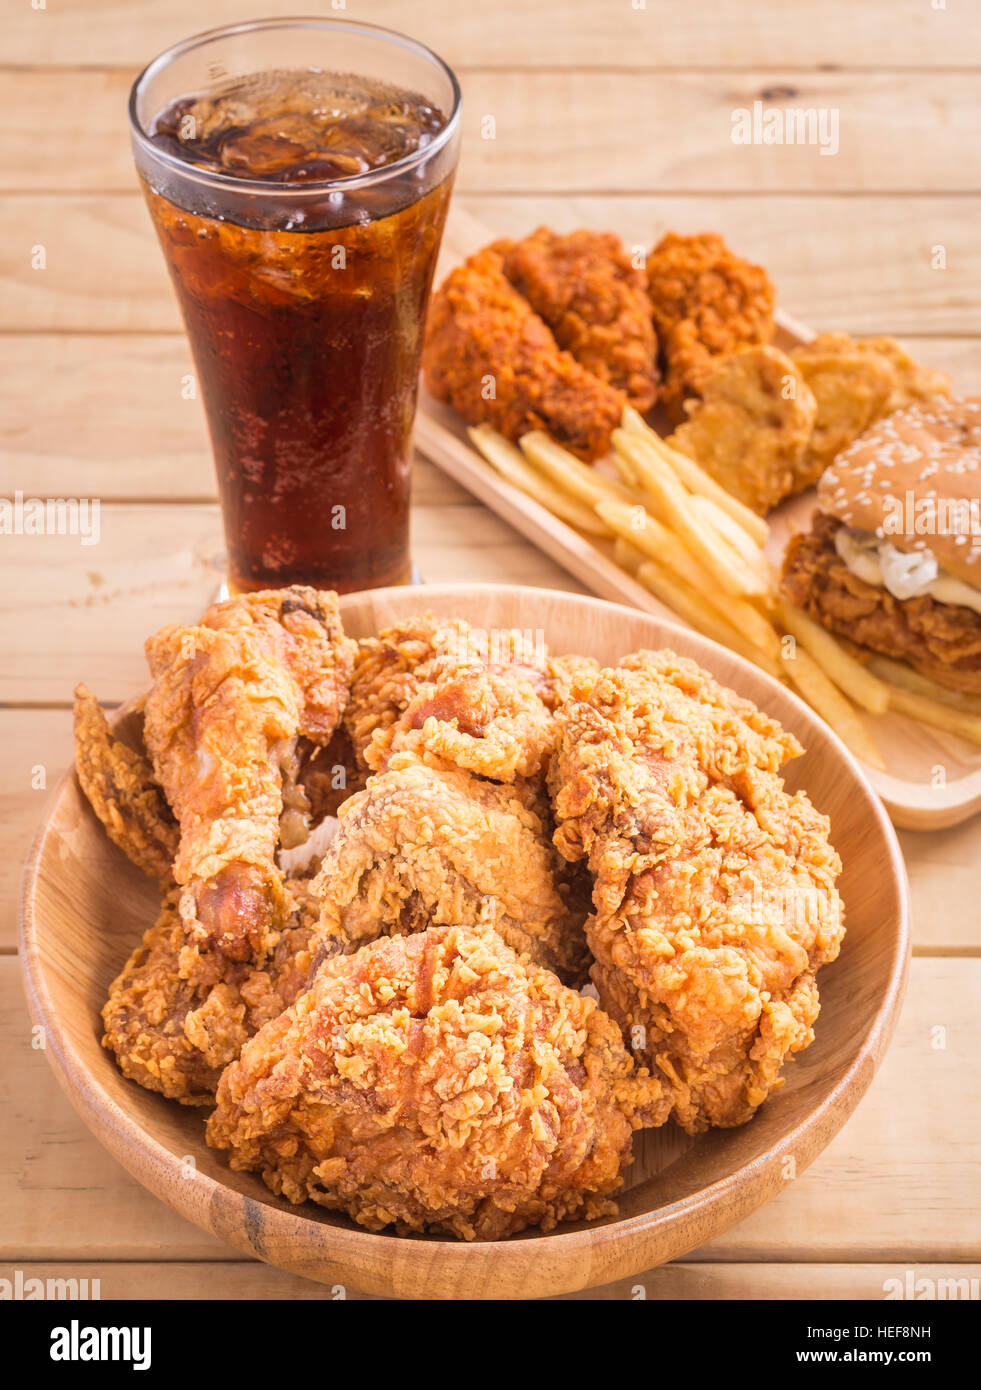 Close up fried chicken, french fries and soft drink on wooden table Stock Photo